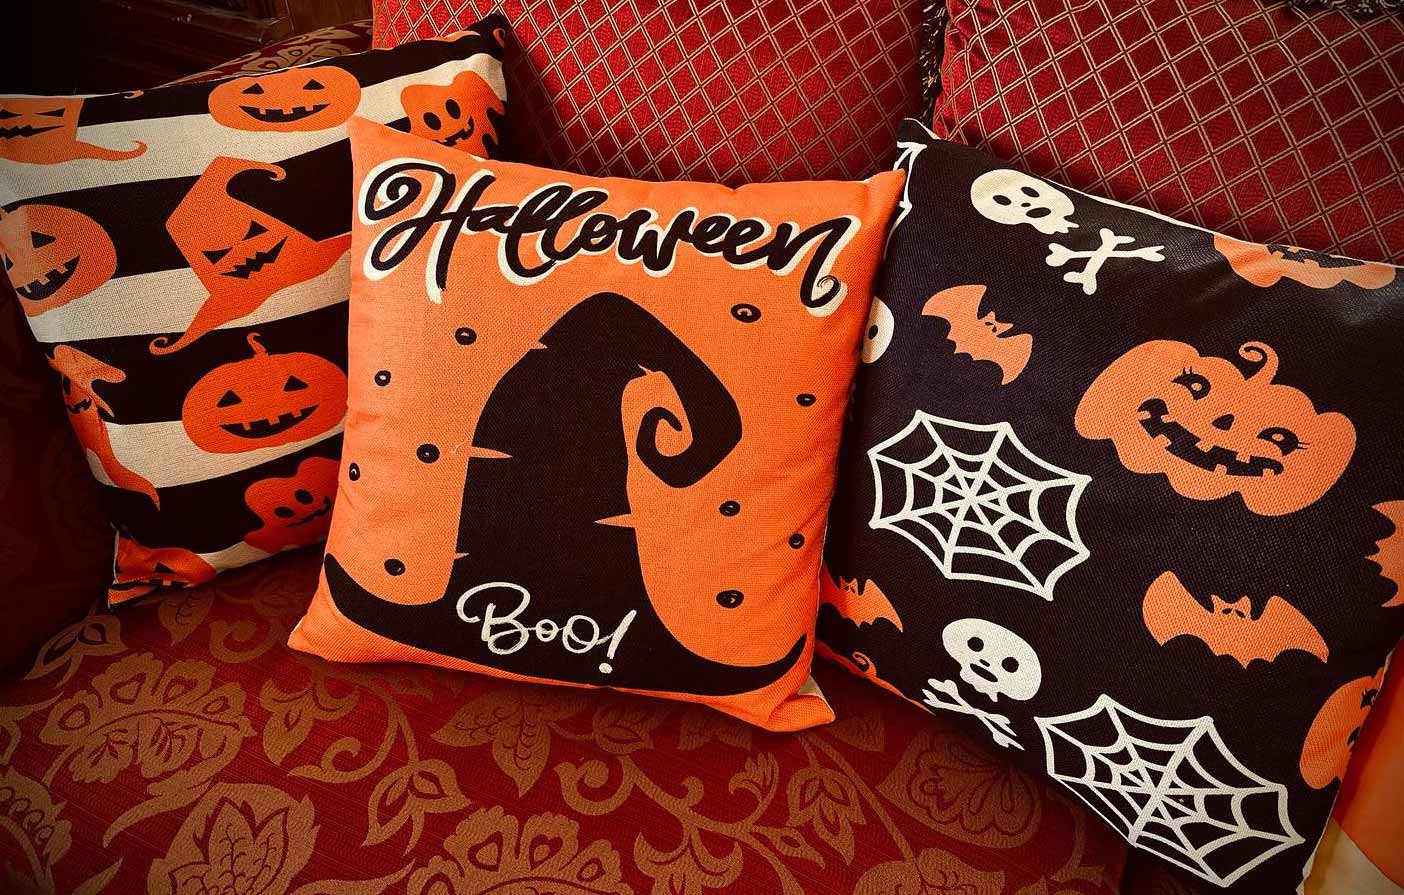 Three Halloween themed pillows in orange, black and white colors